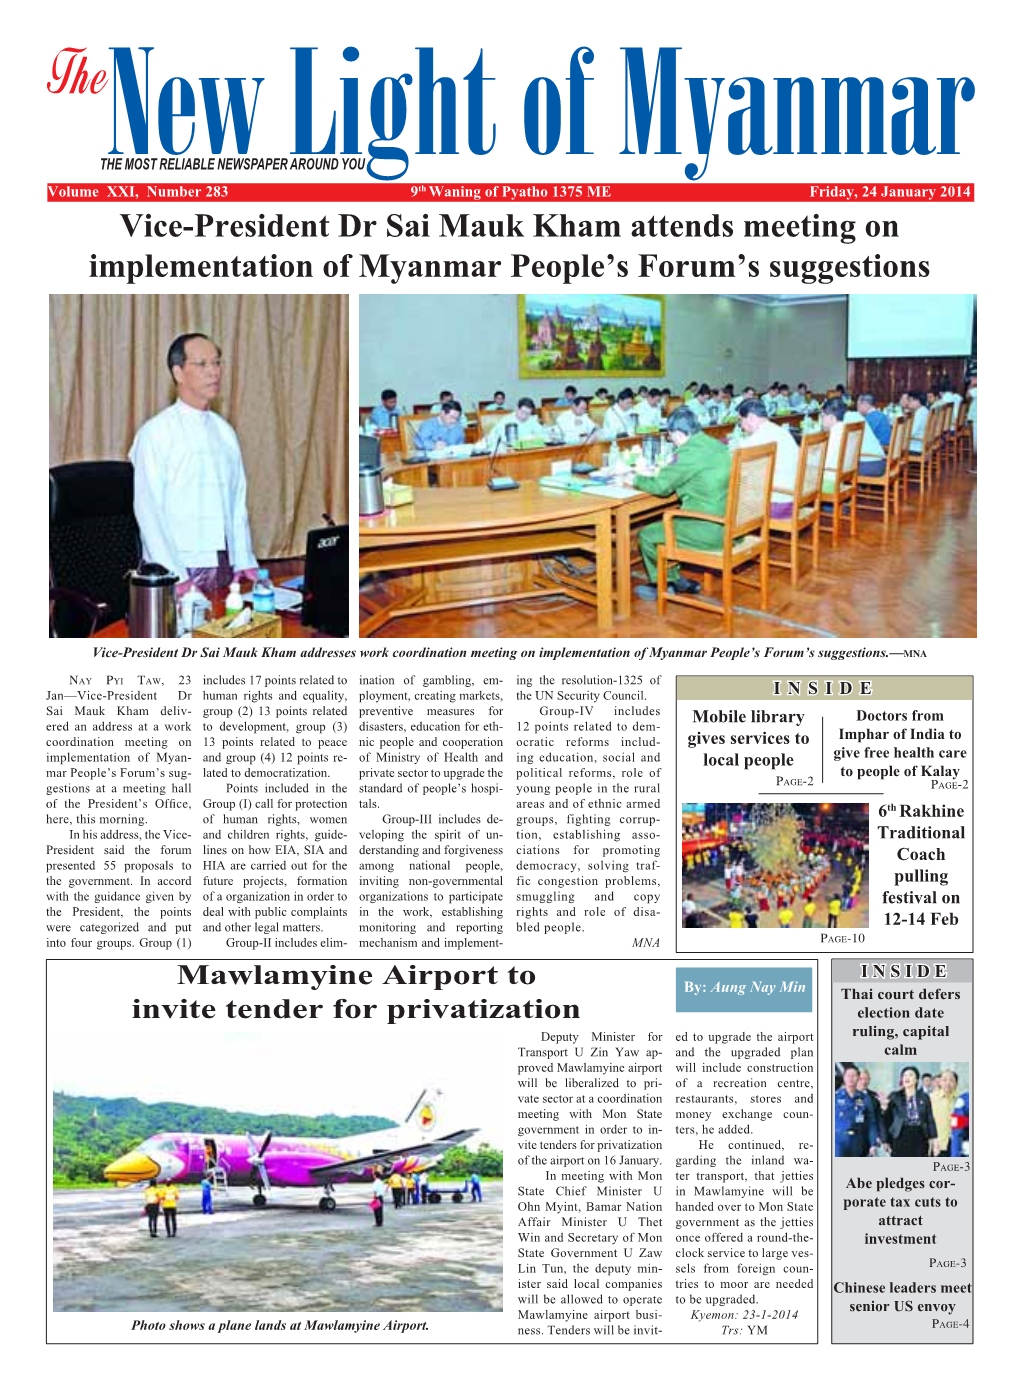 Vice-President Dr Sai Mauk Kham Attends Meeting on Implementation of Myanmar People’S Forum’S Suggestions